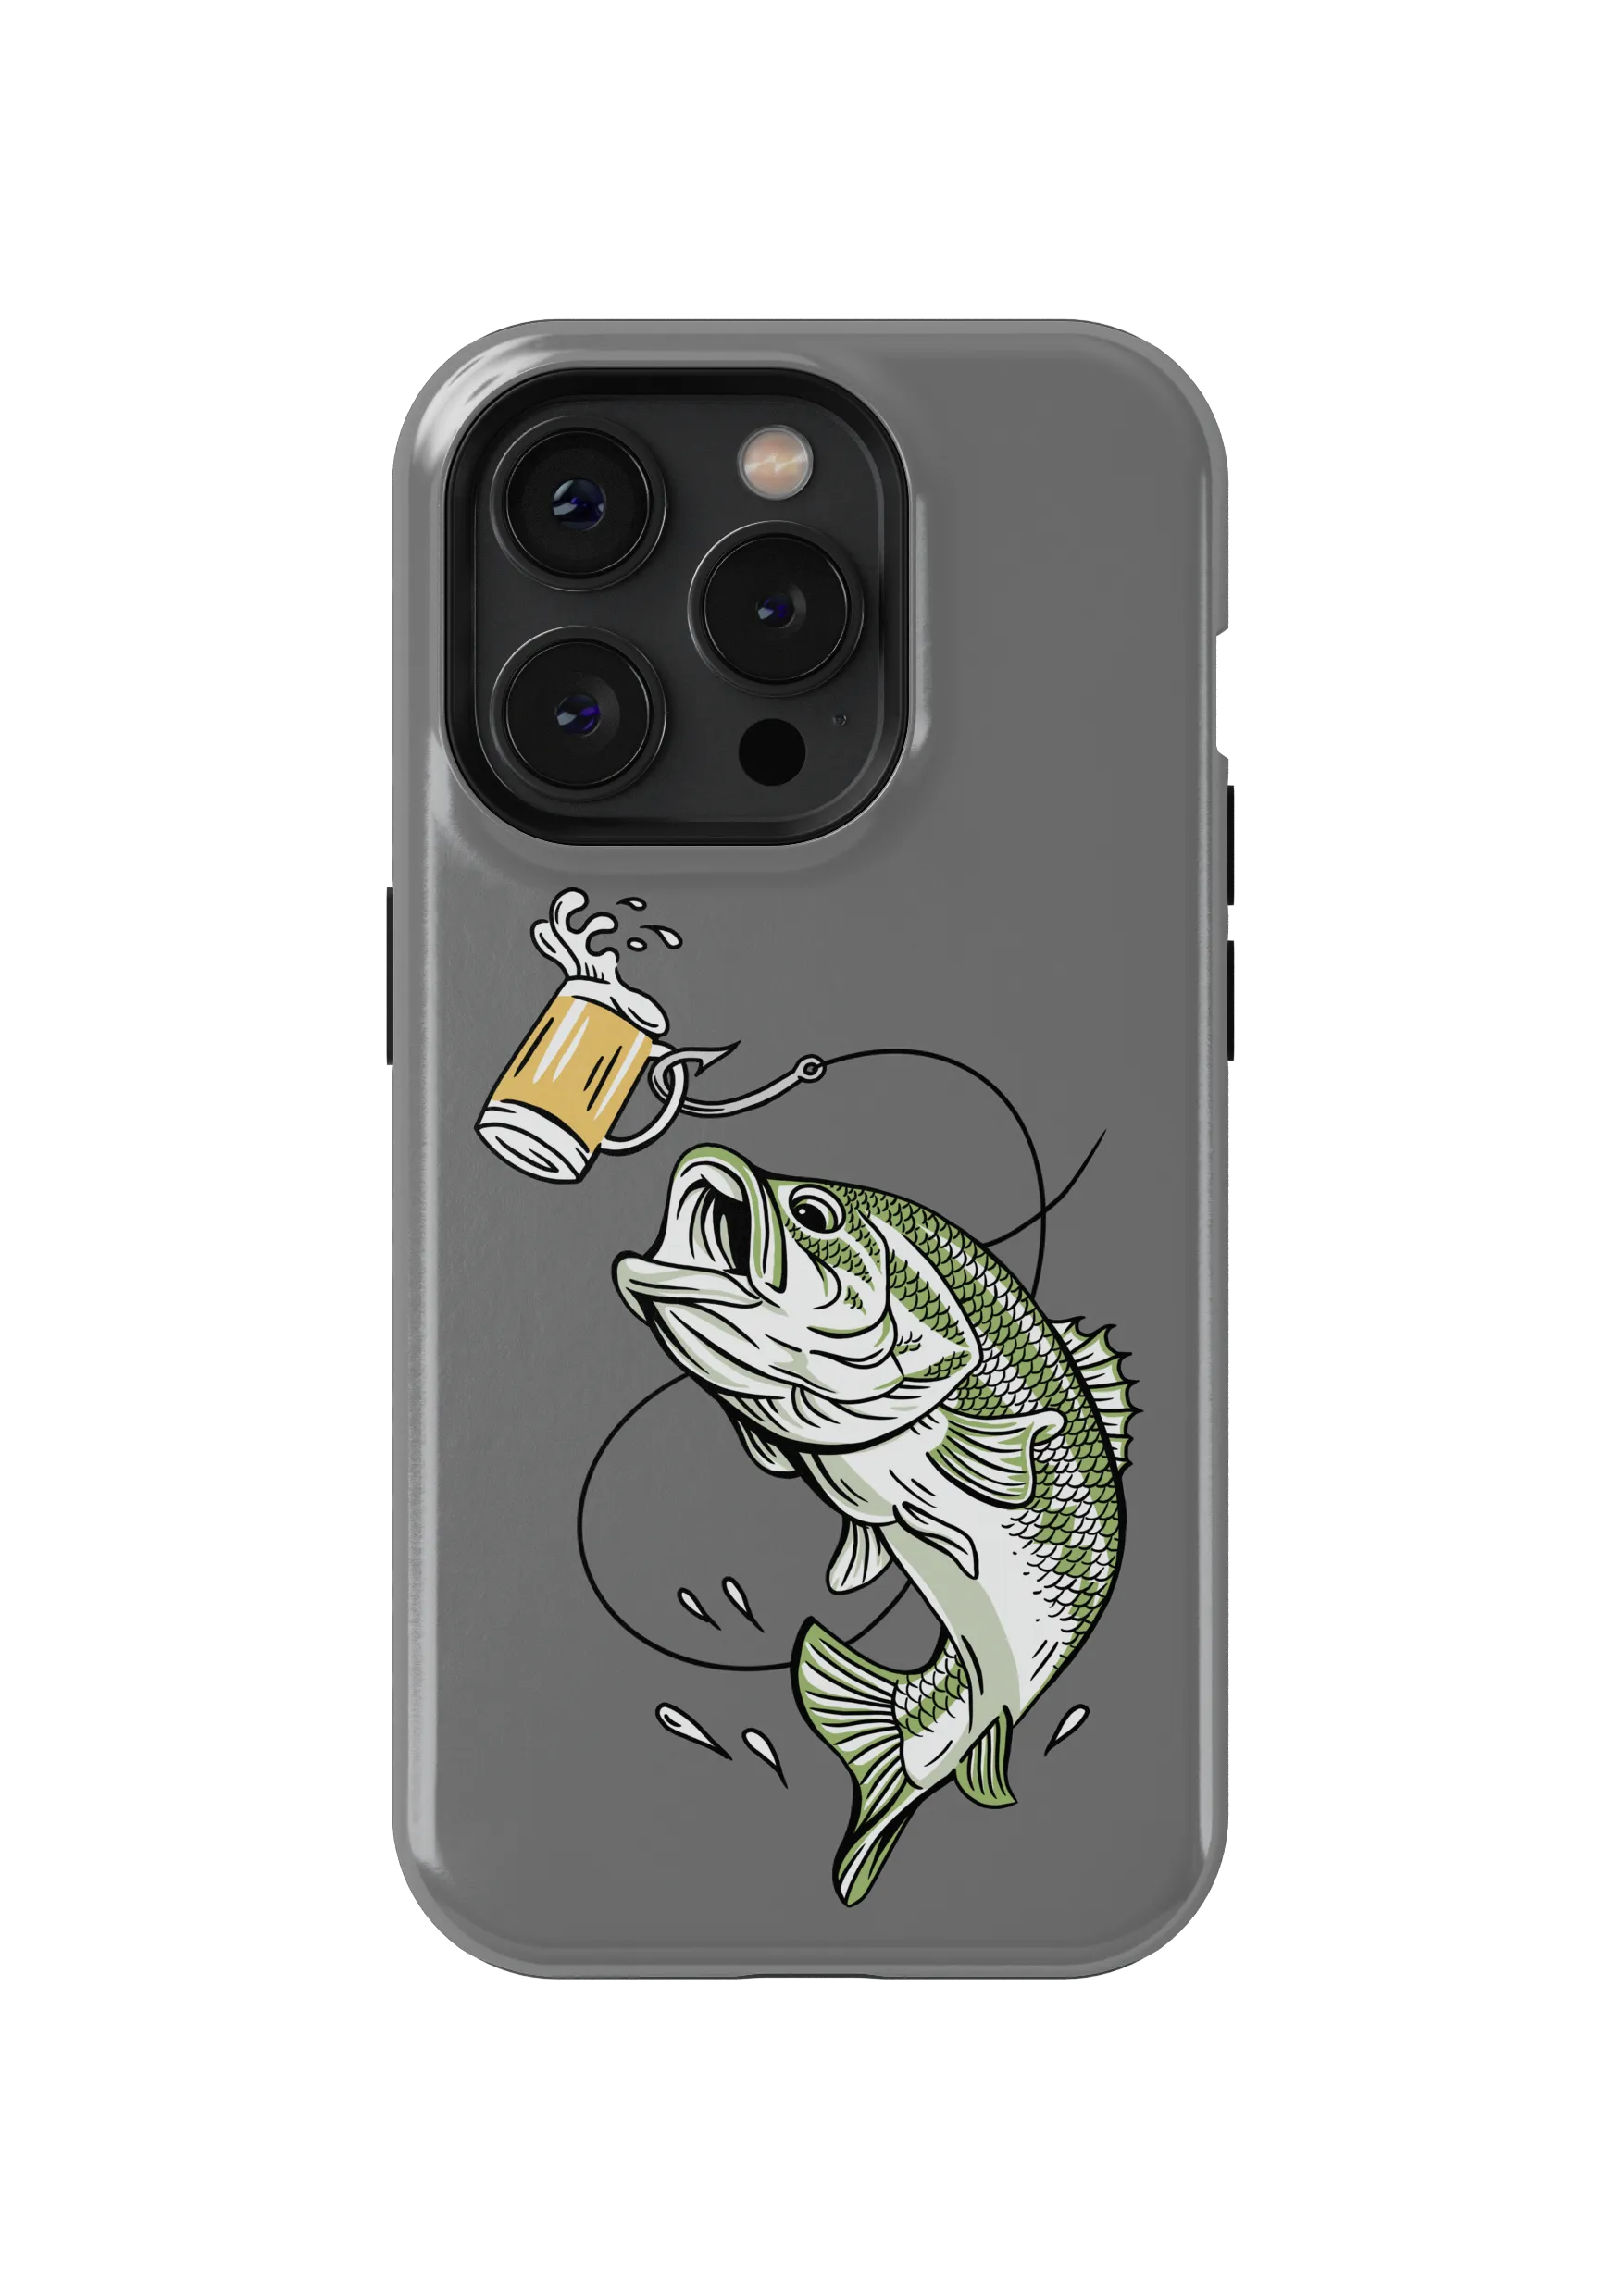 BIG FISH HEARTBEAT iPhone Case for Sale by yani69